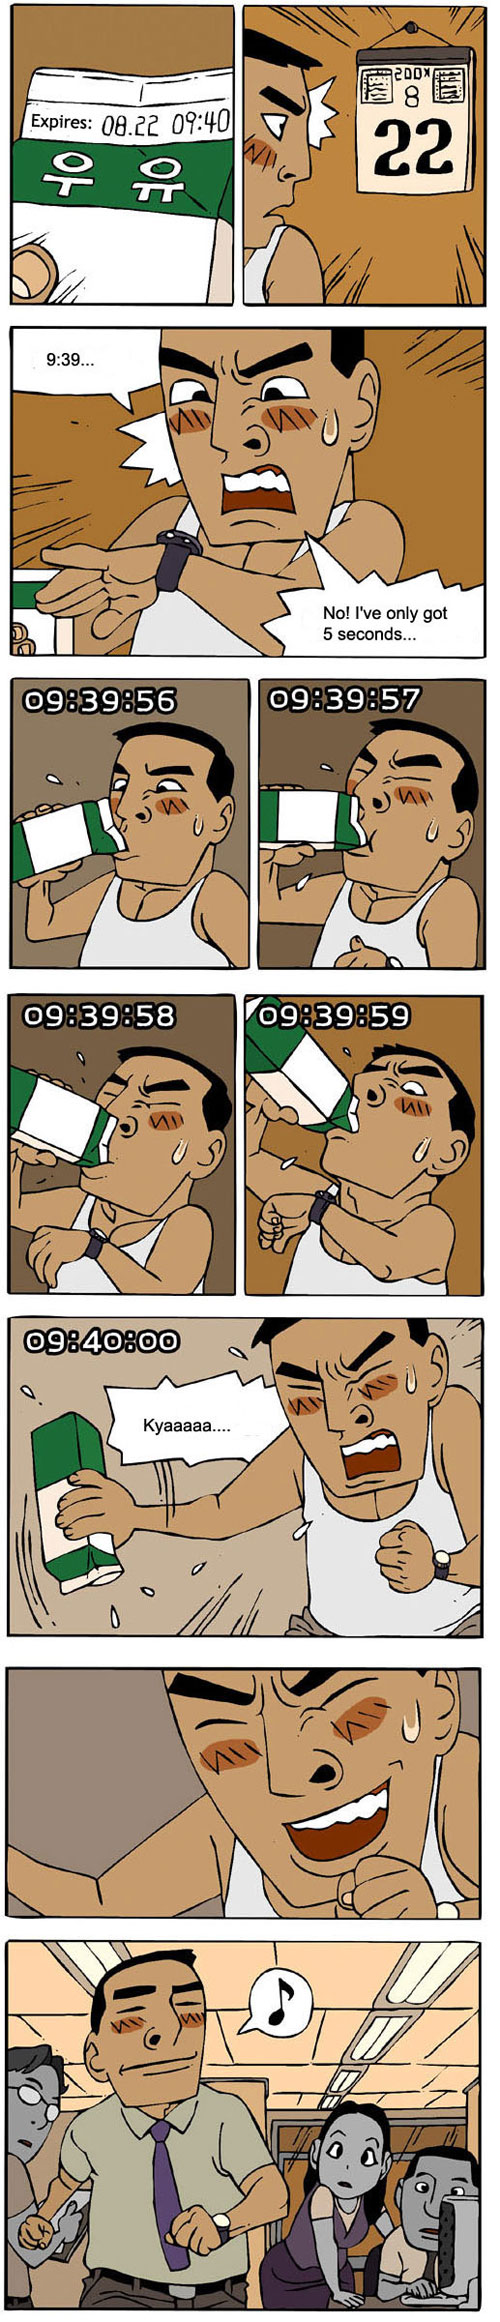 I Have Only Got 5 Seconds - Korean Comic